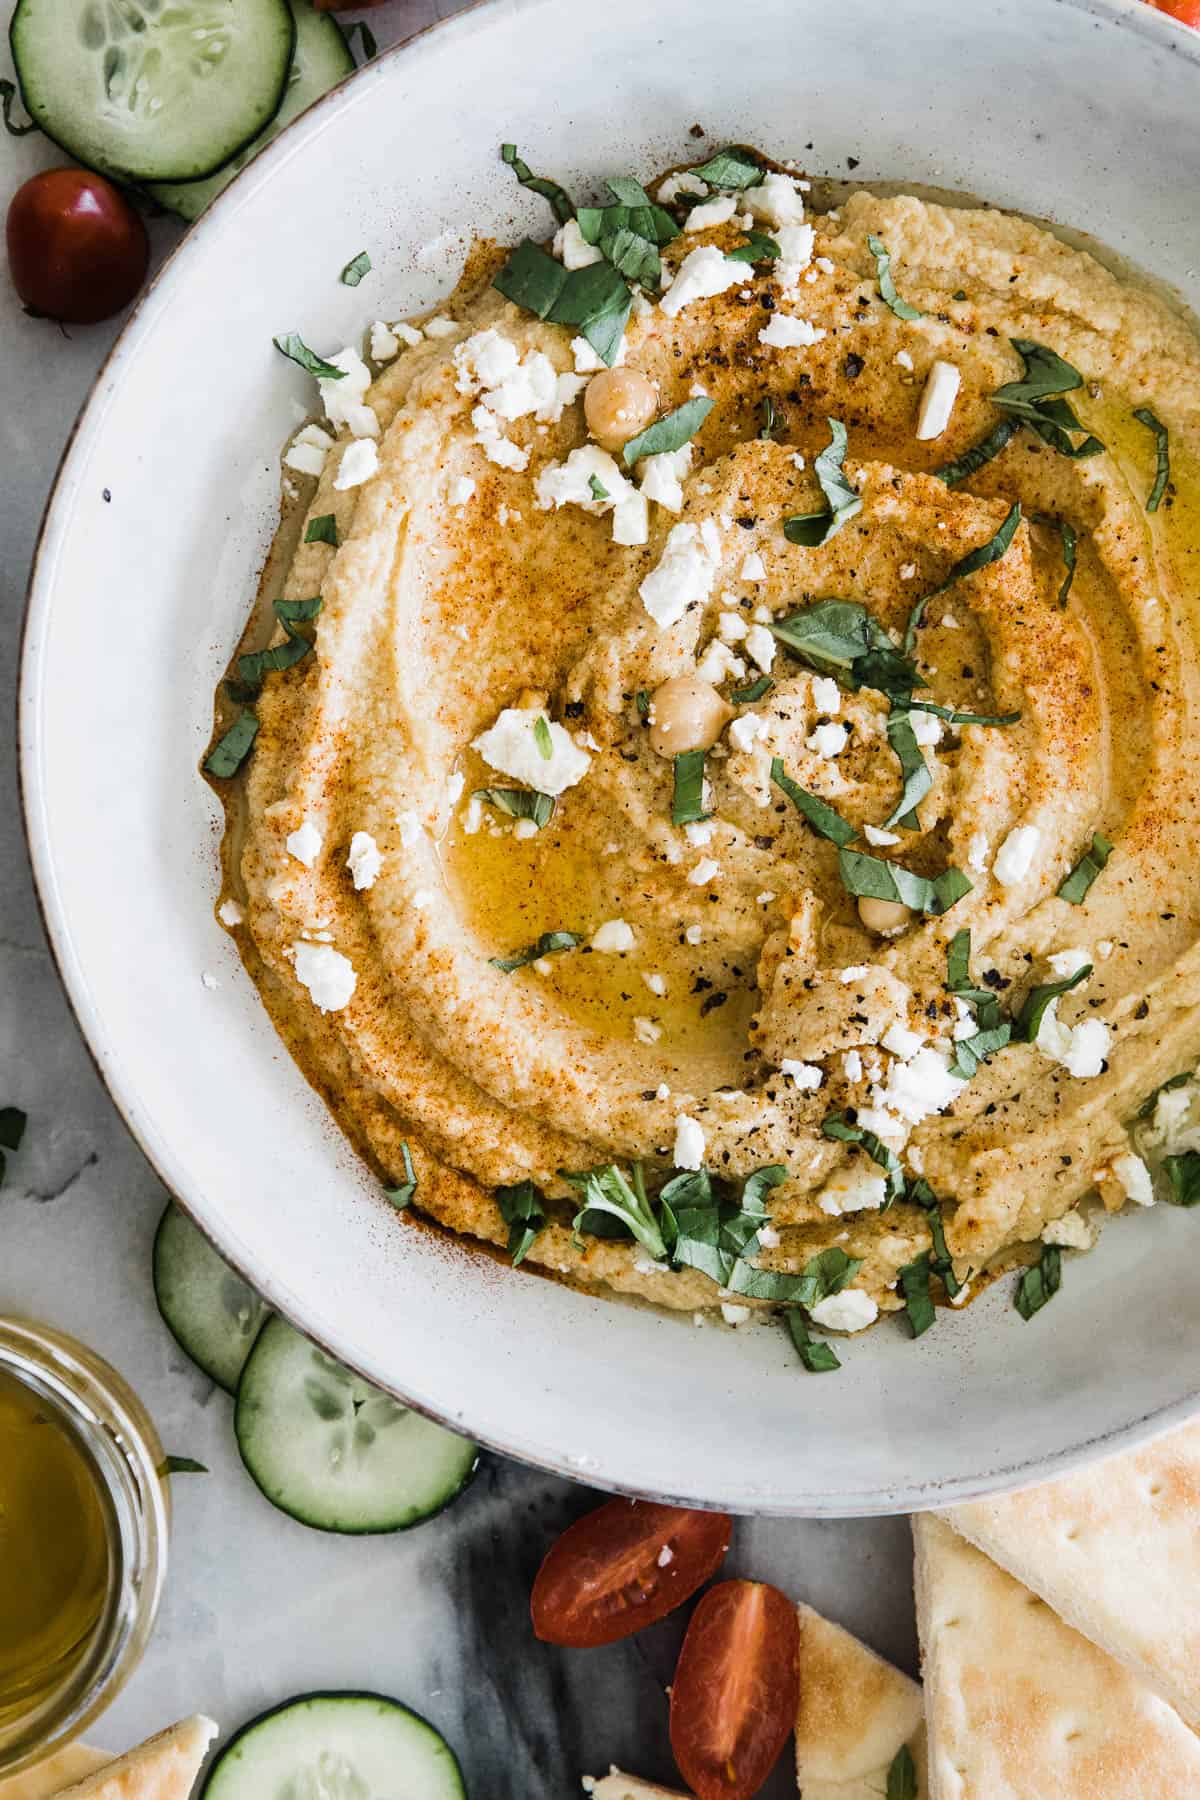 A bowl of healthy hummus drizzled with olive oil and sliced cucumbers and tomatoes on the side.